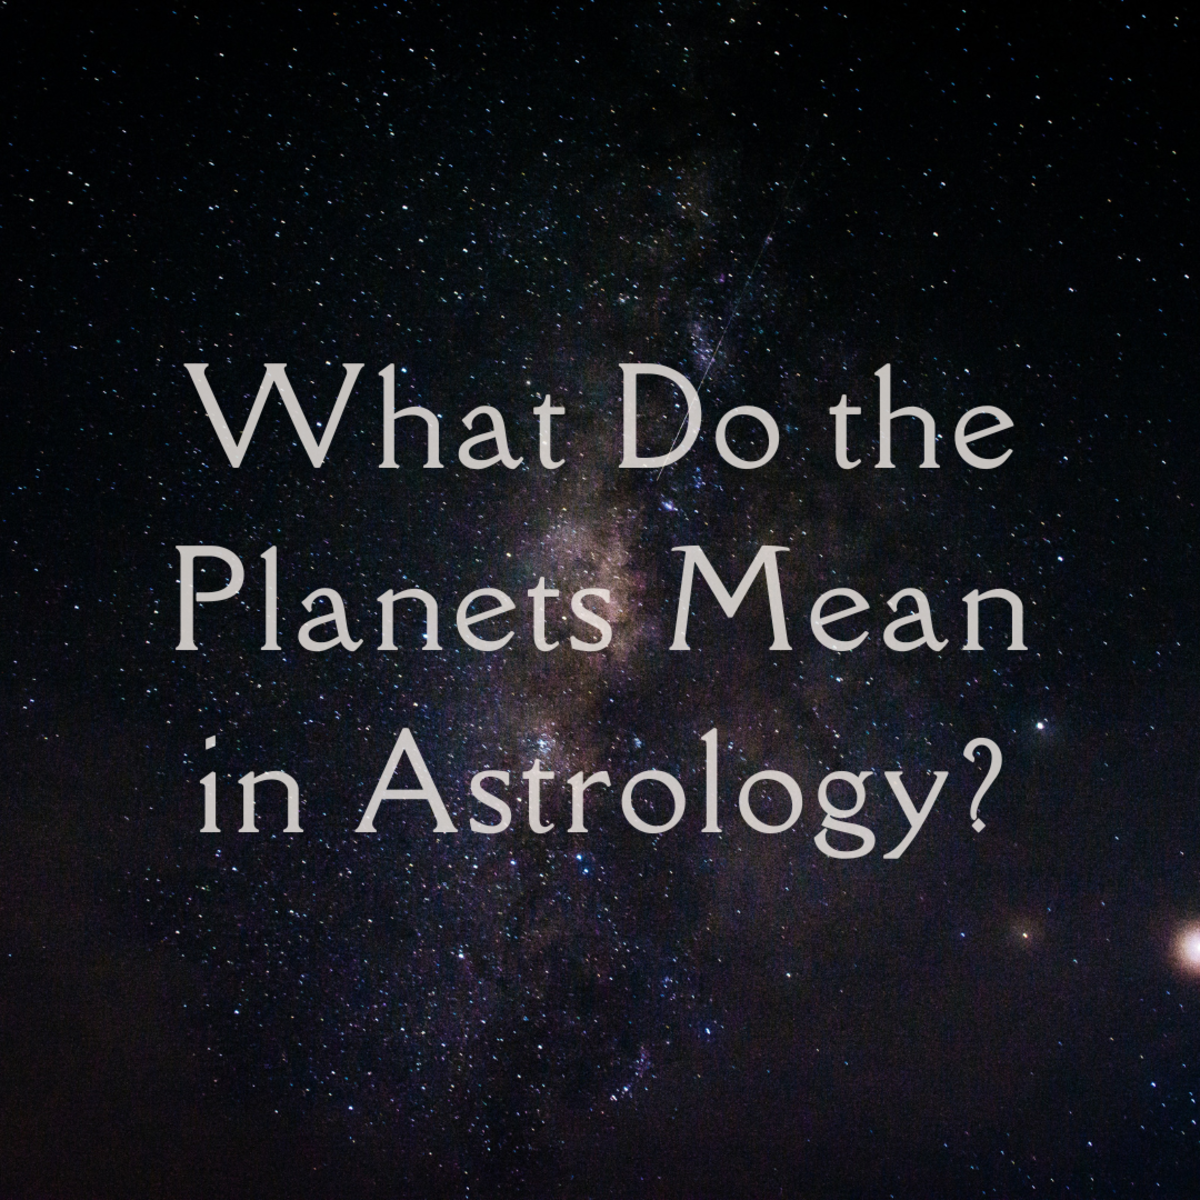 Each planet carries unique astrological significance.